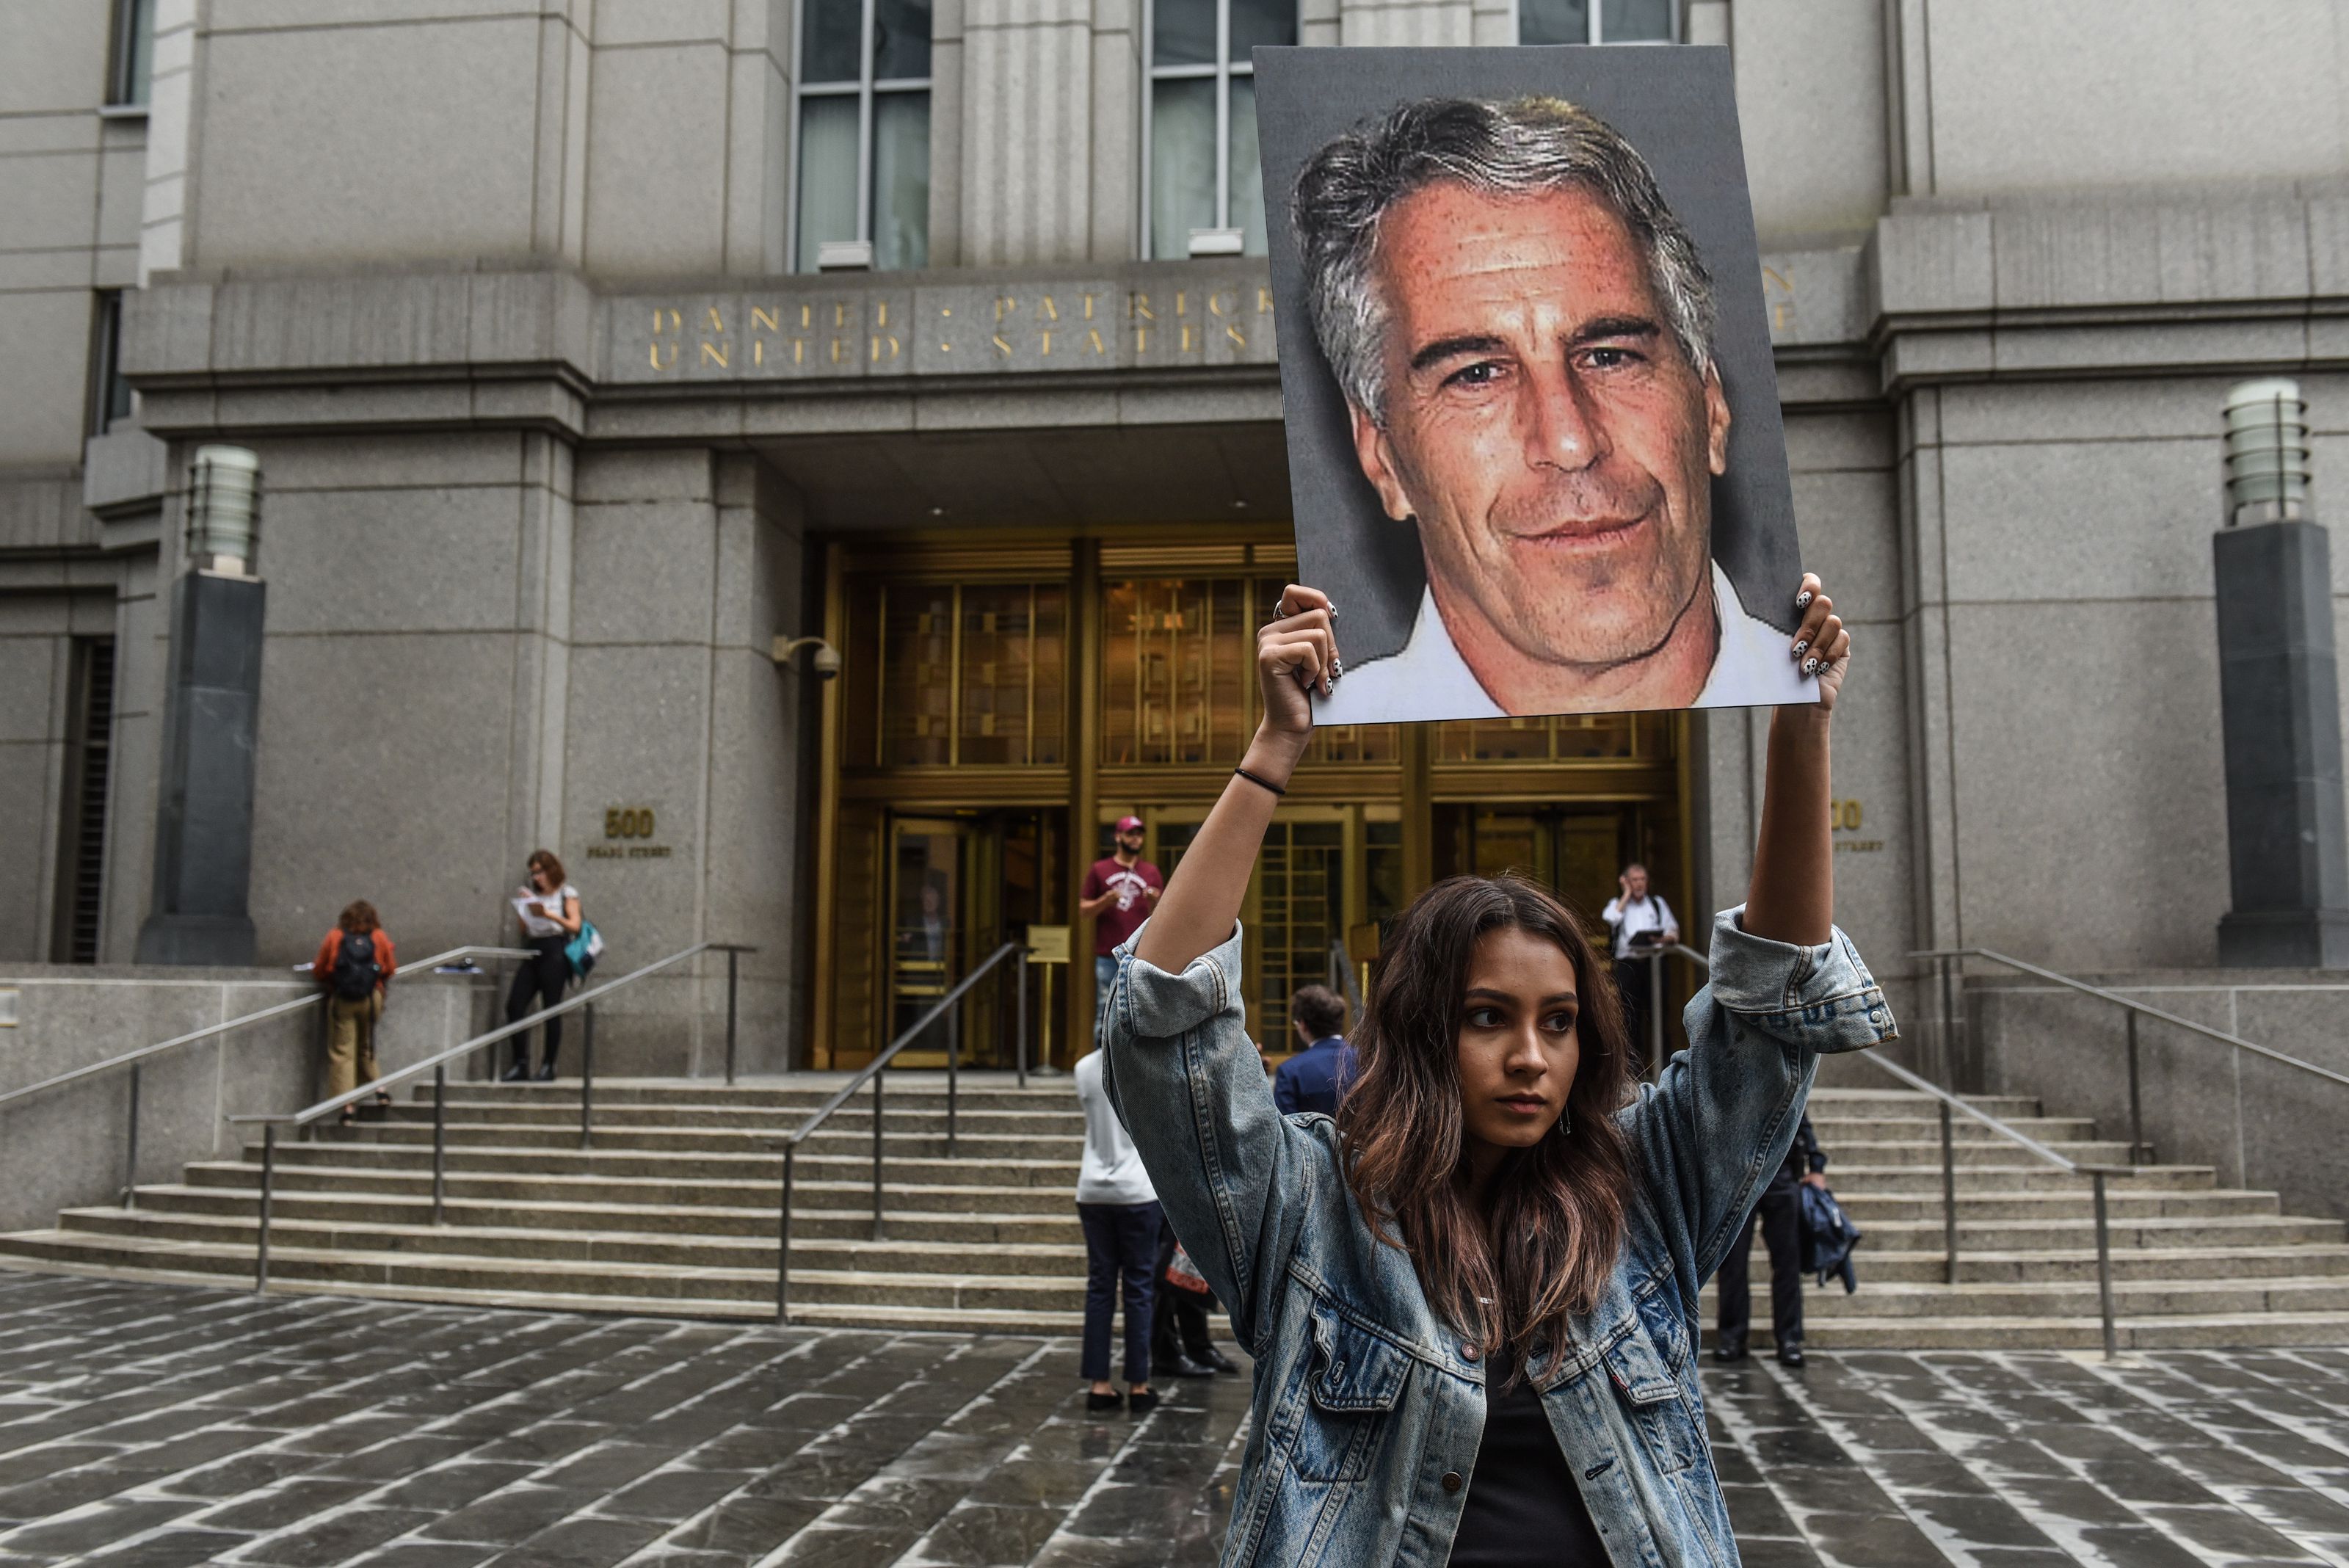 Nude Photos Of Underage Girls Seized From Epstein Mansion The